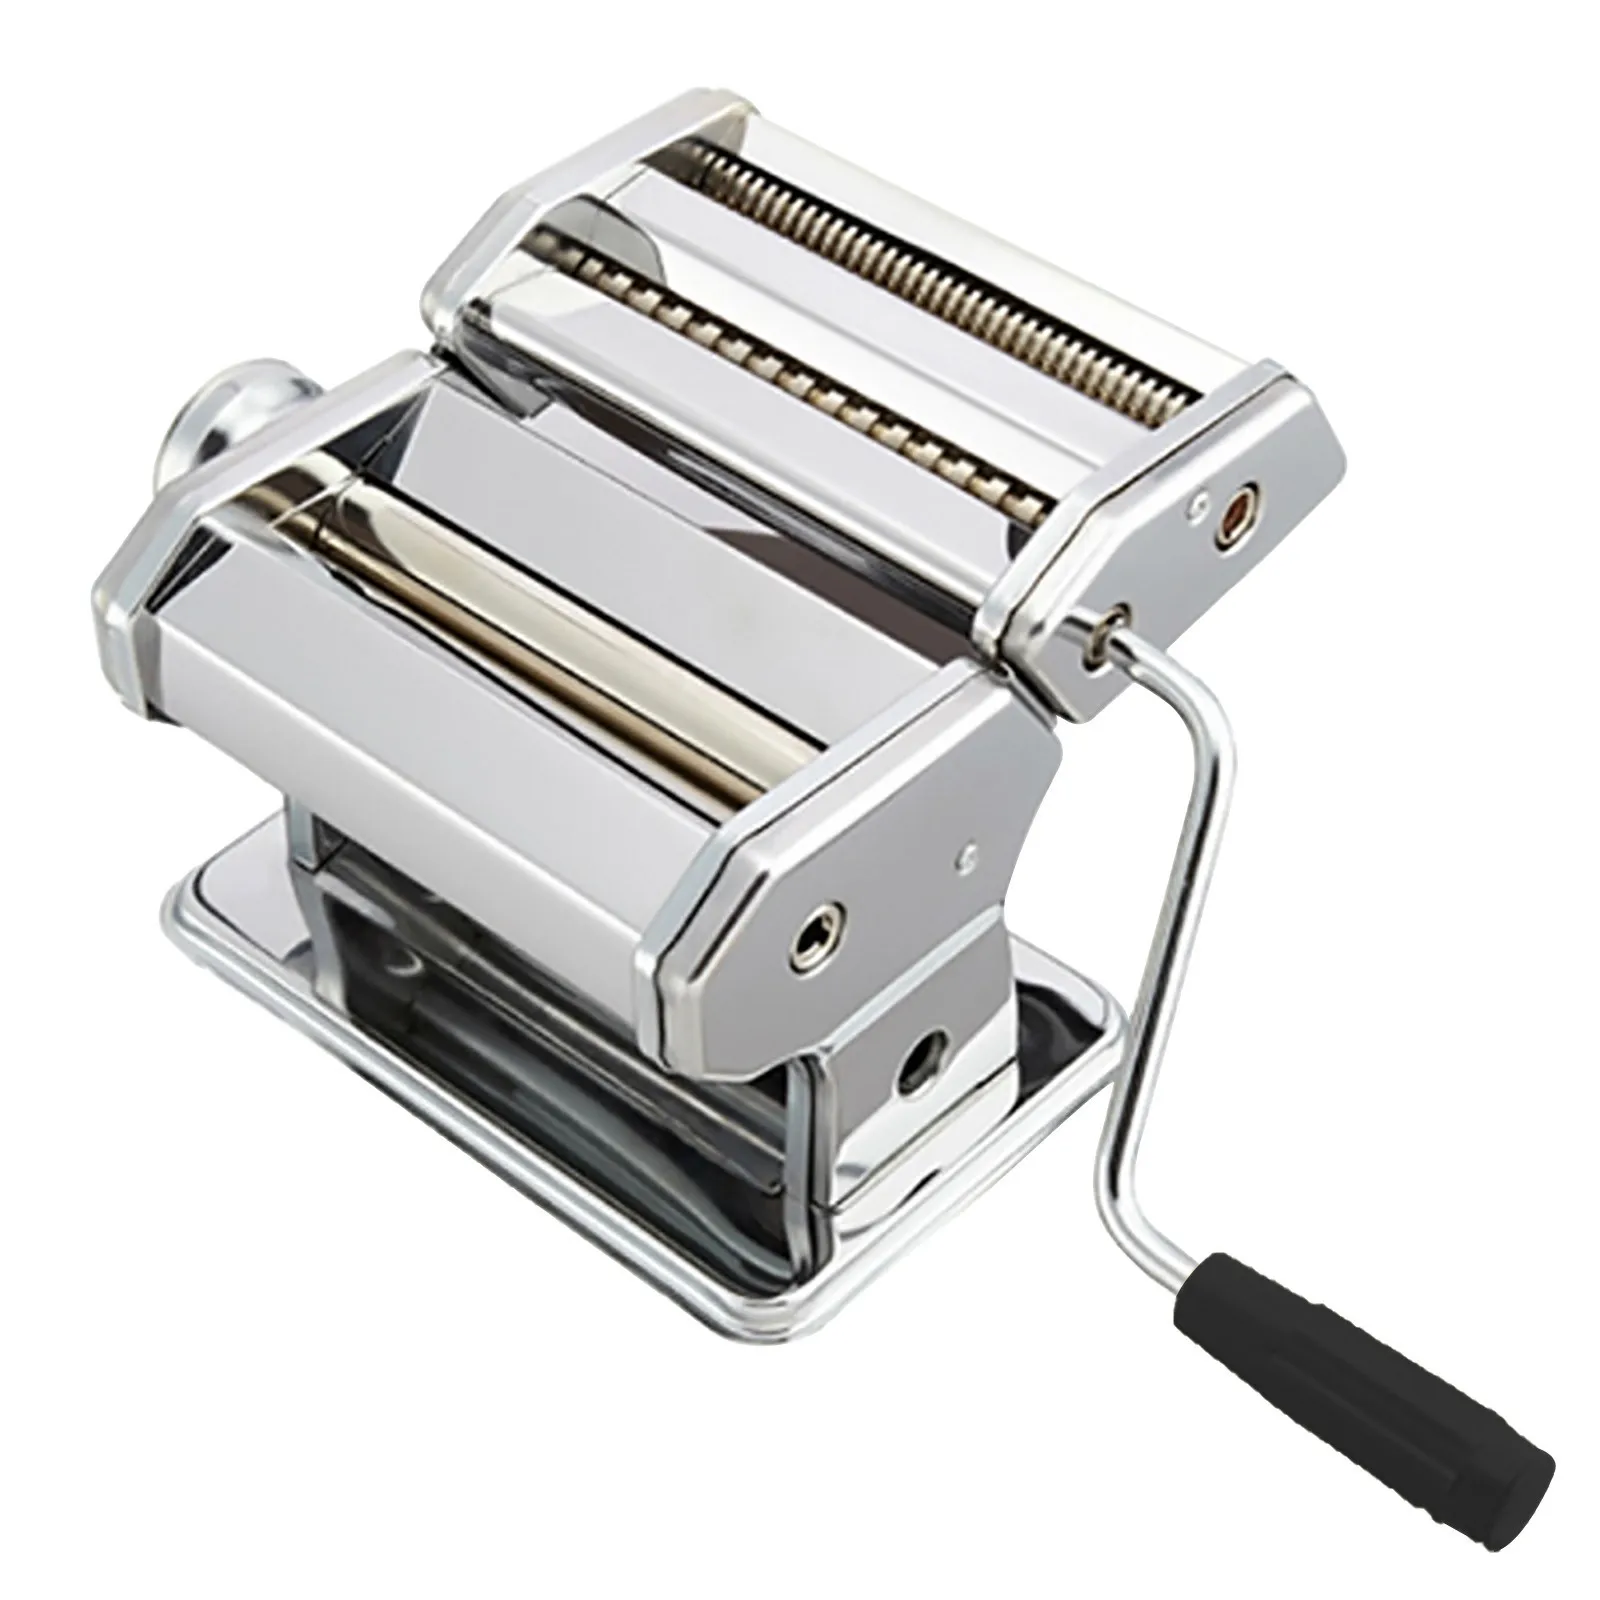 Pasta Machine Noodle maker Dough press Stainless Steel